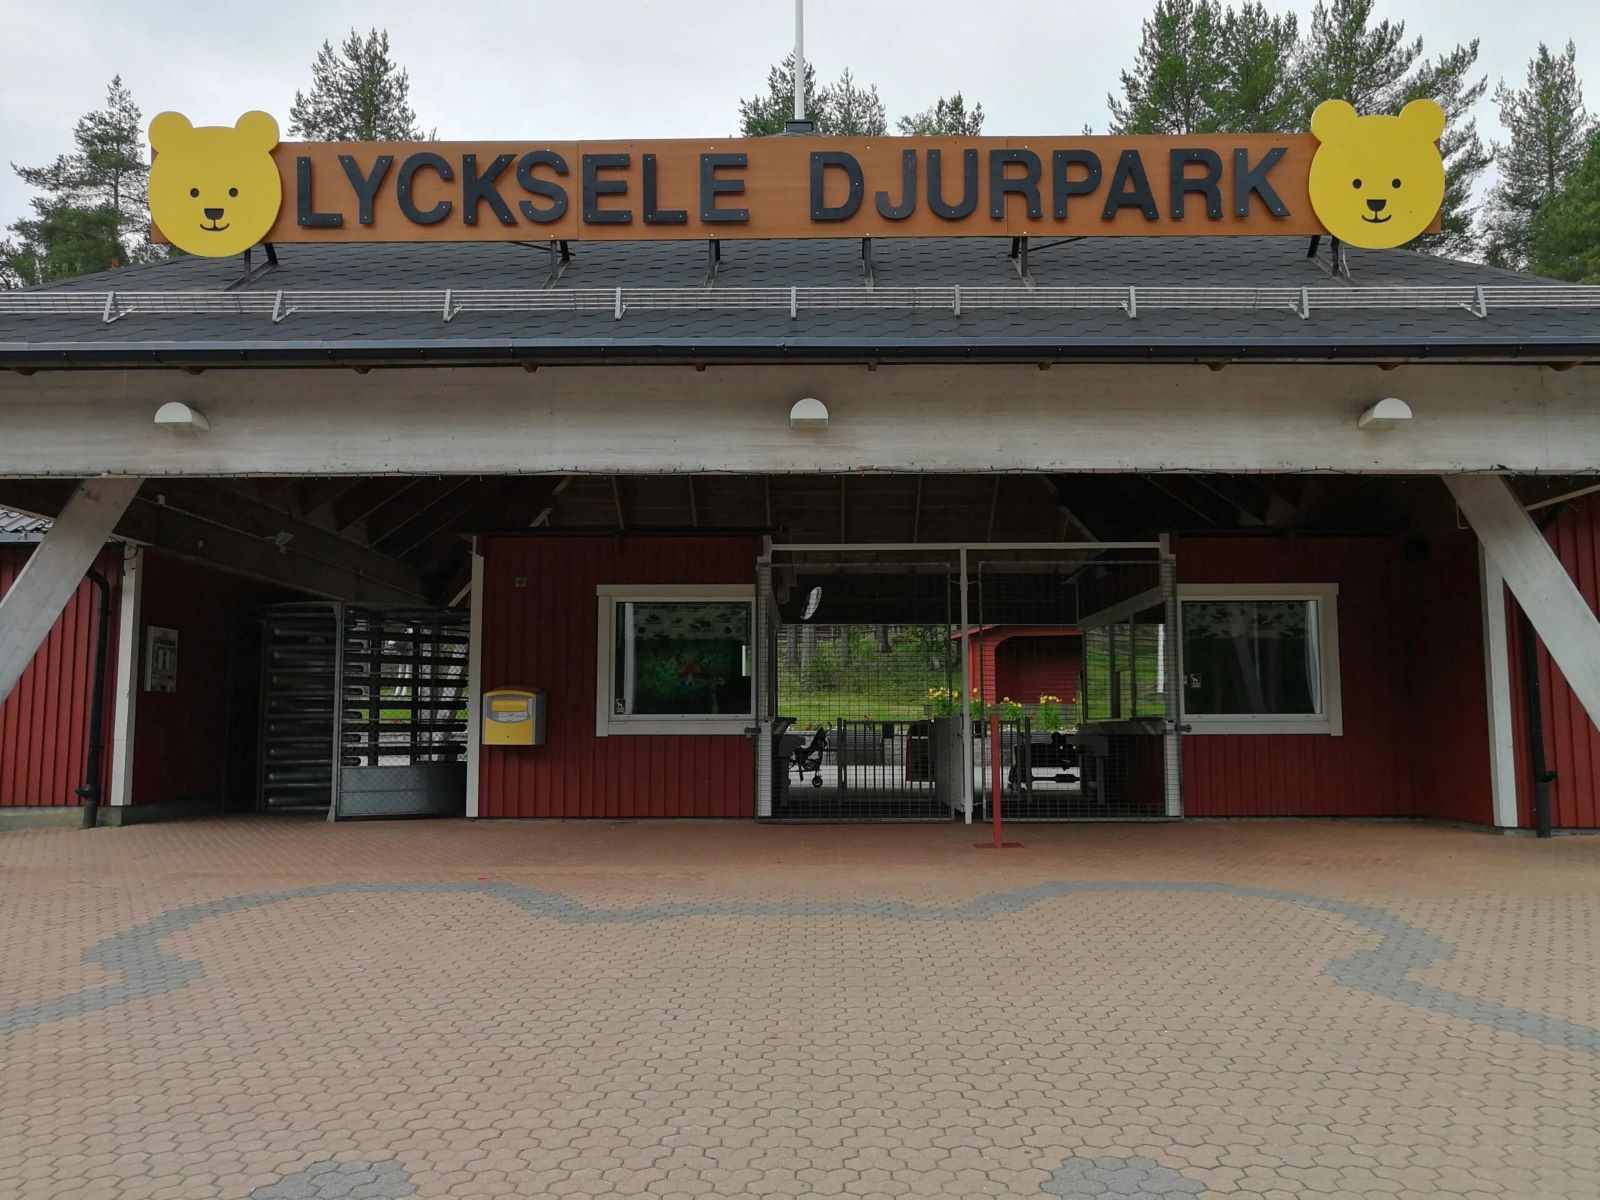 13-extraordinary-facts-about-lycksele-zoo